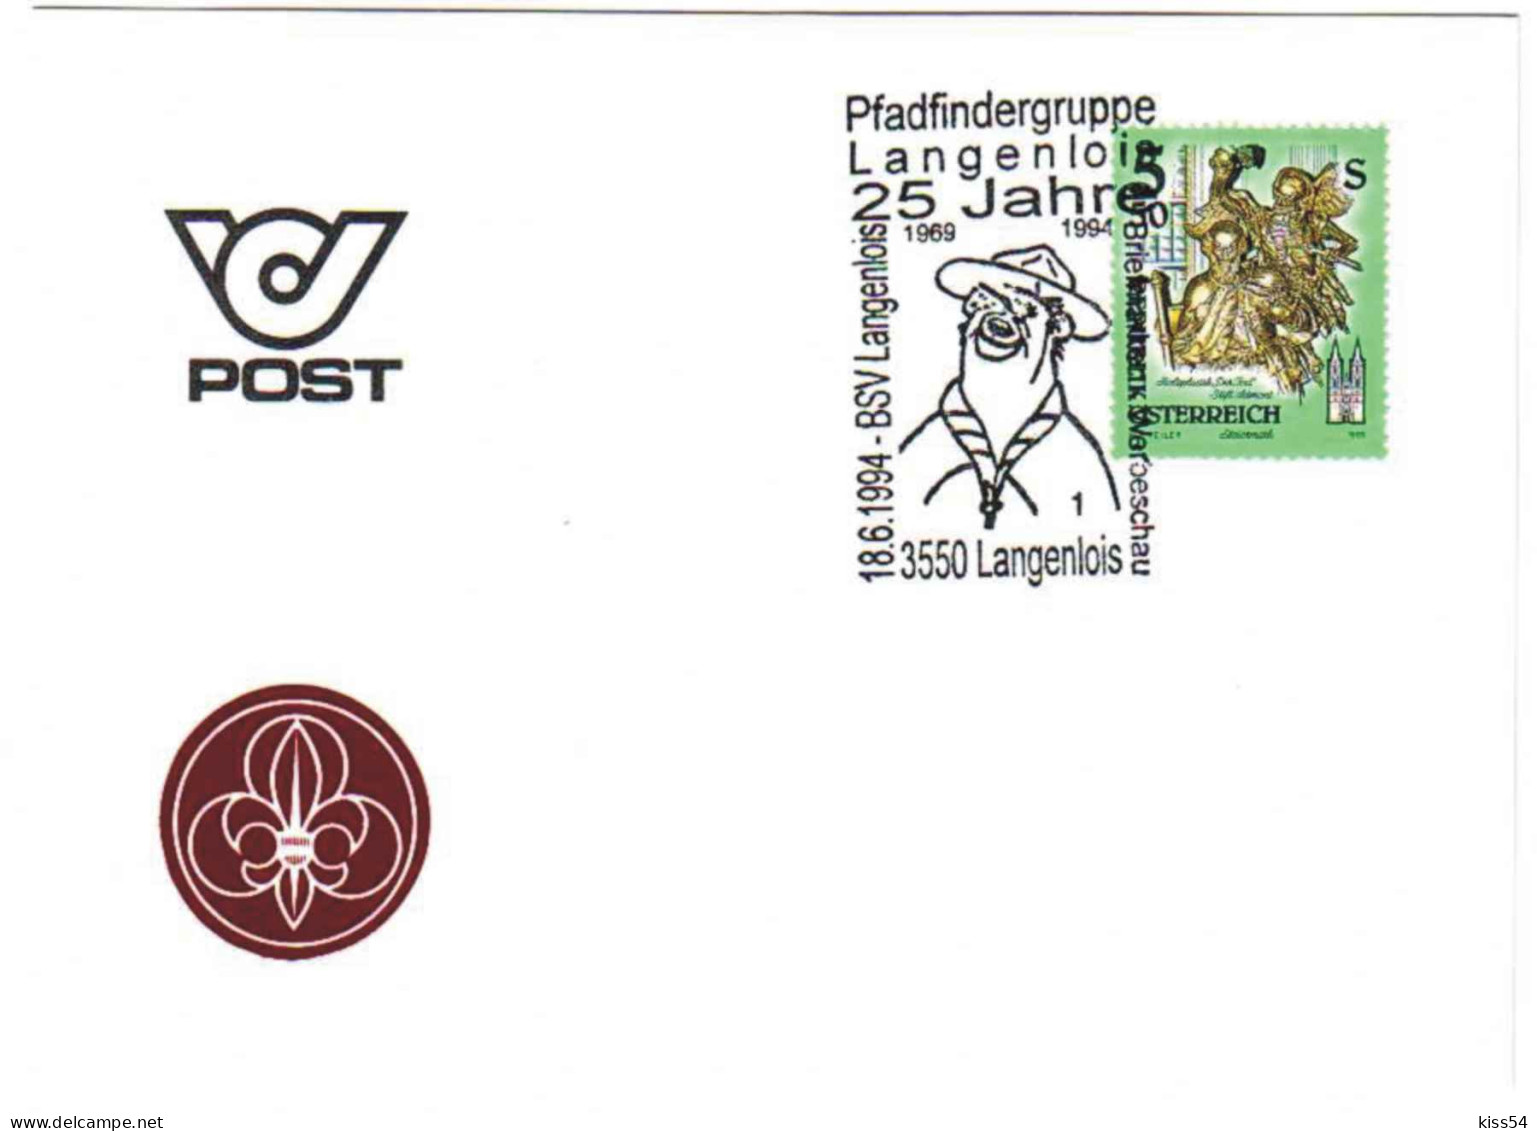 SC 51 - 281 Scout AUSTRIA - Cover - Used - 1994 - Covers & Documents